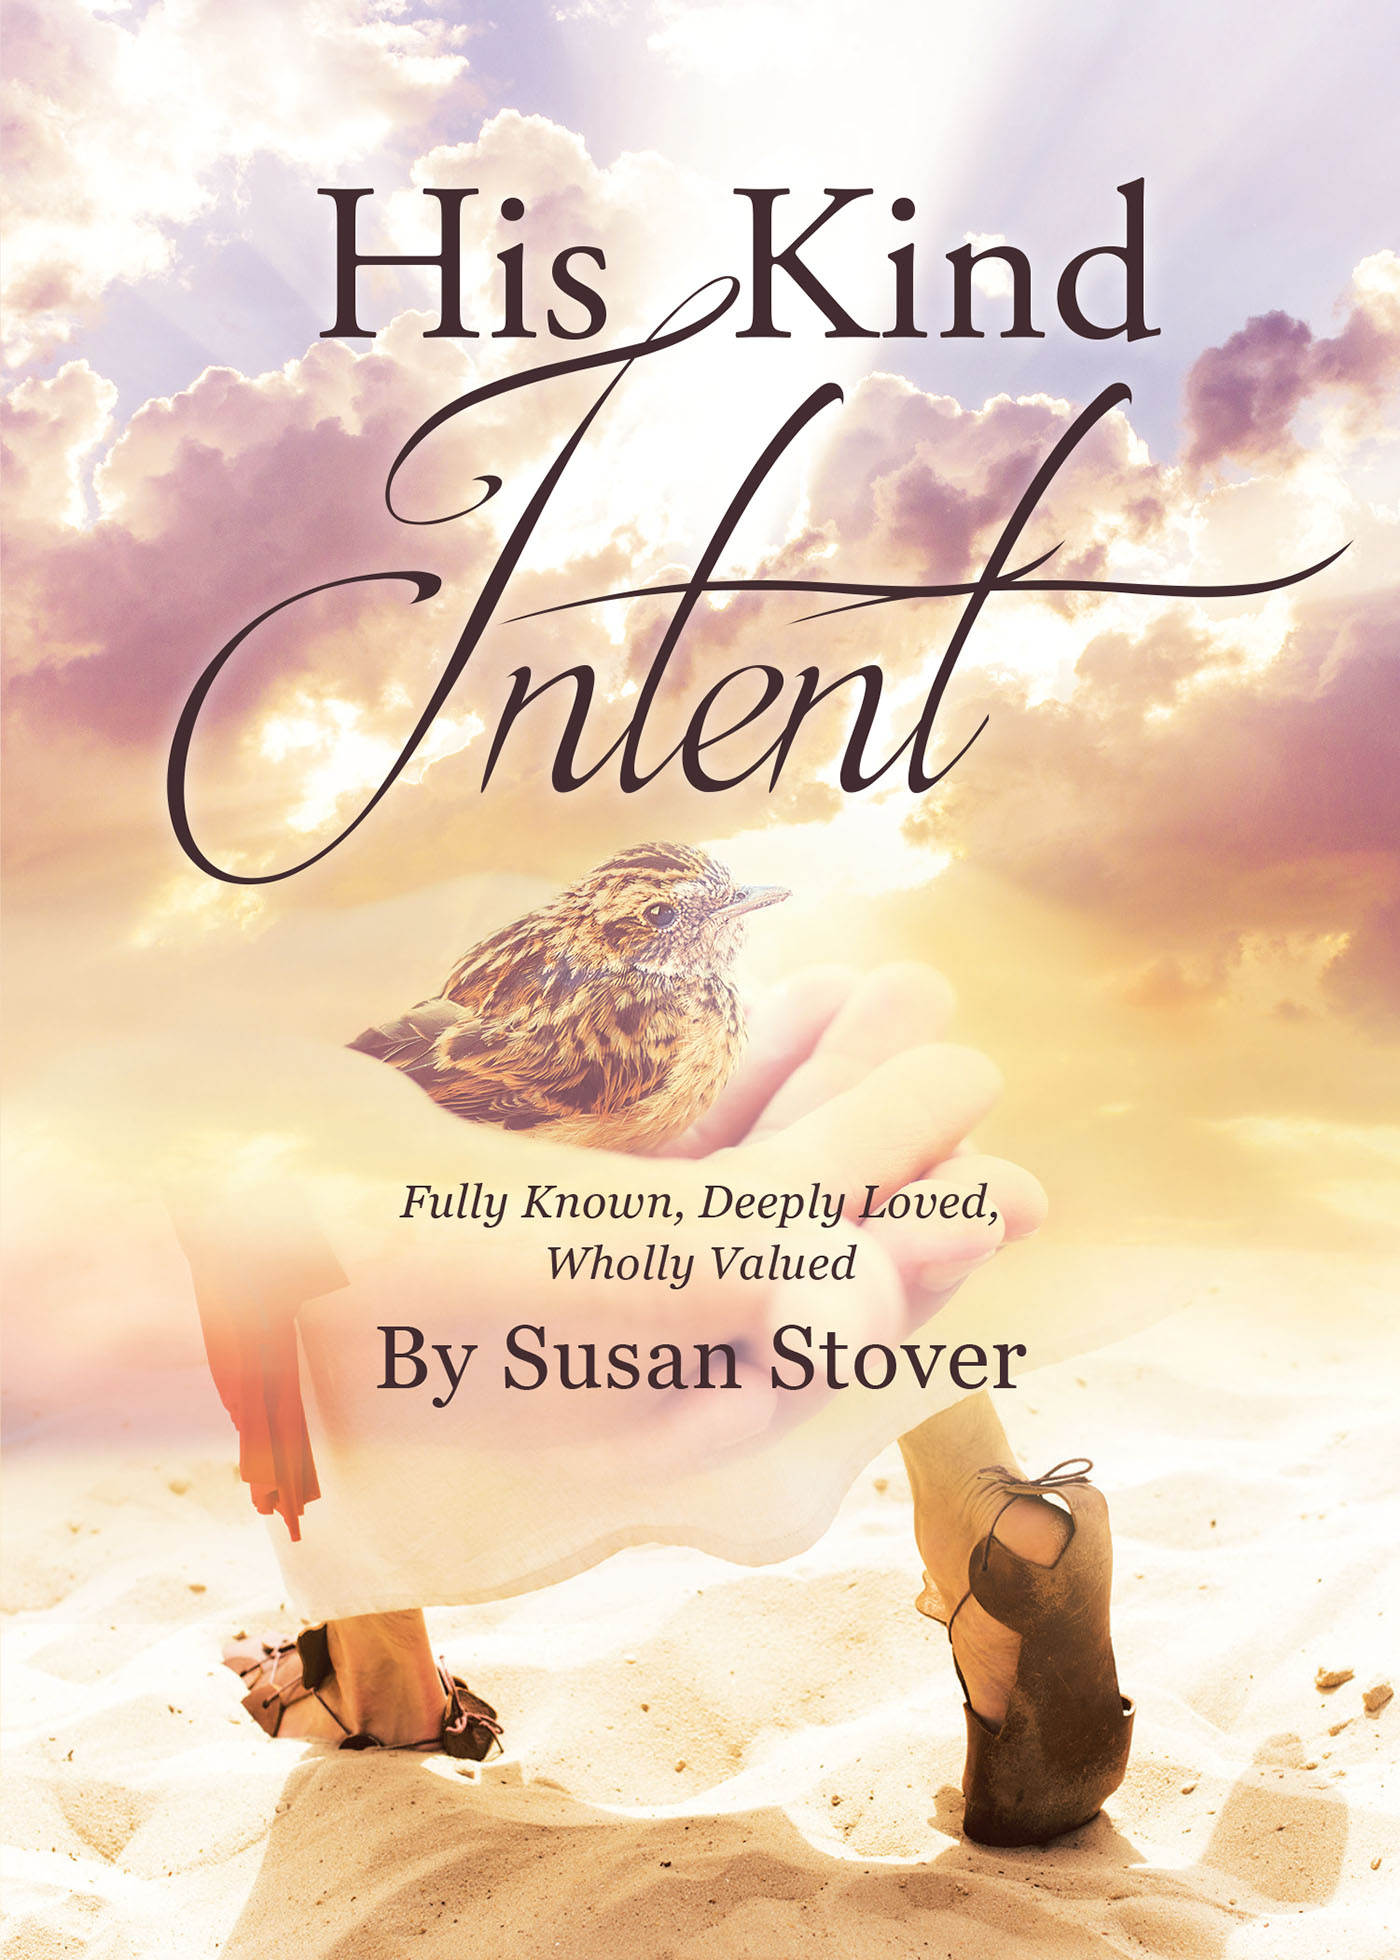 Author Susan Stover’s New Book, "His Kind Intent: Fully Known, Deeply Loved, Wholly Valued," Explores the Incredible, Lasting Love That Jesus Has Available for All People